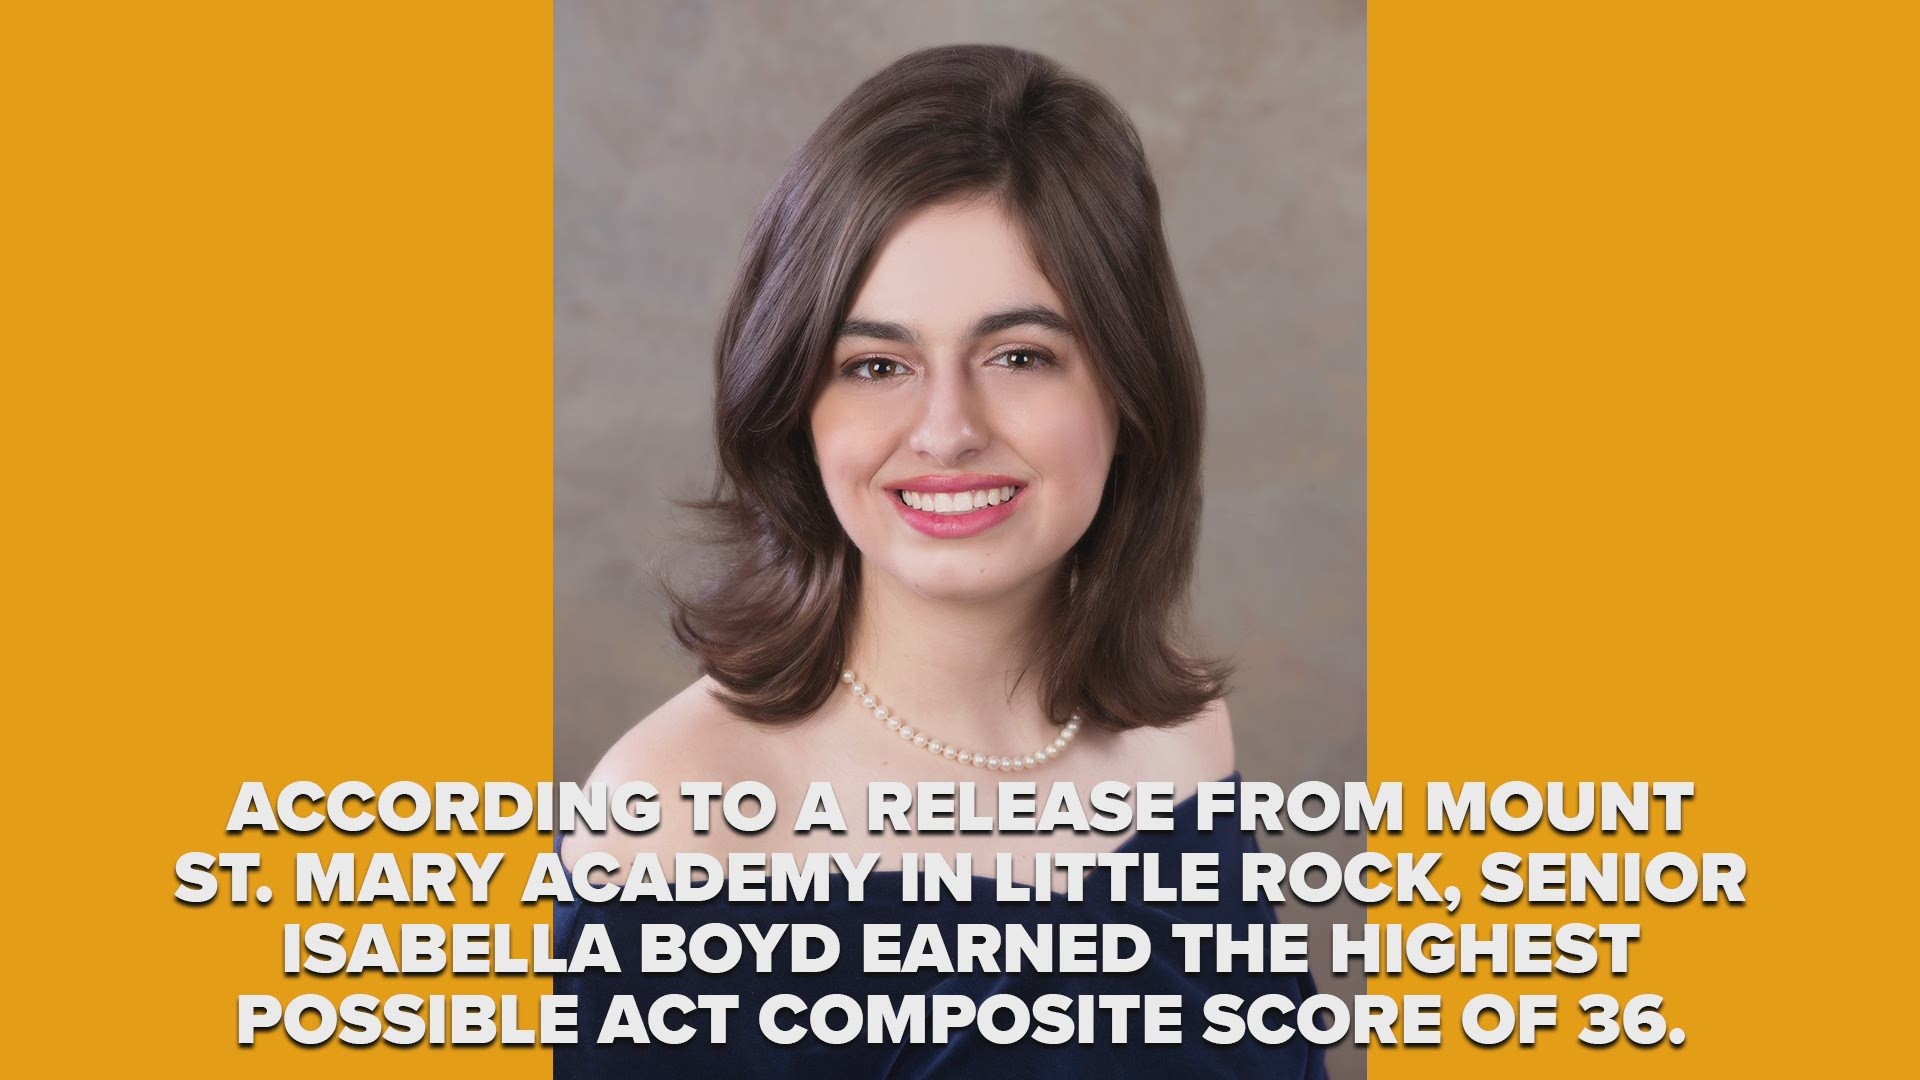 This was Isabella Boyd's second time taking the ACT after scoring a 34 on the first try.